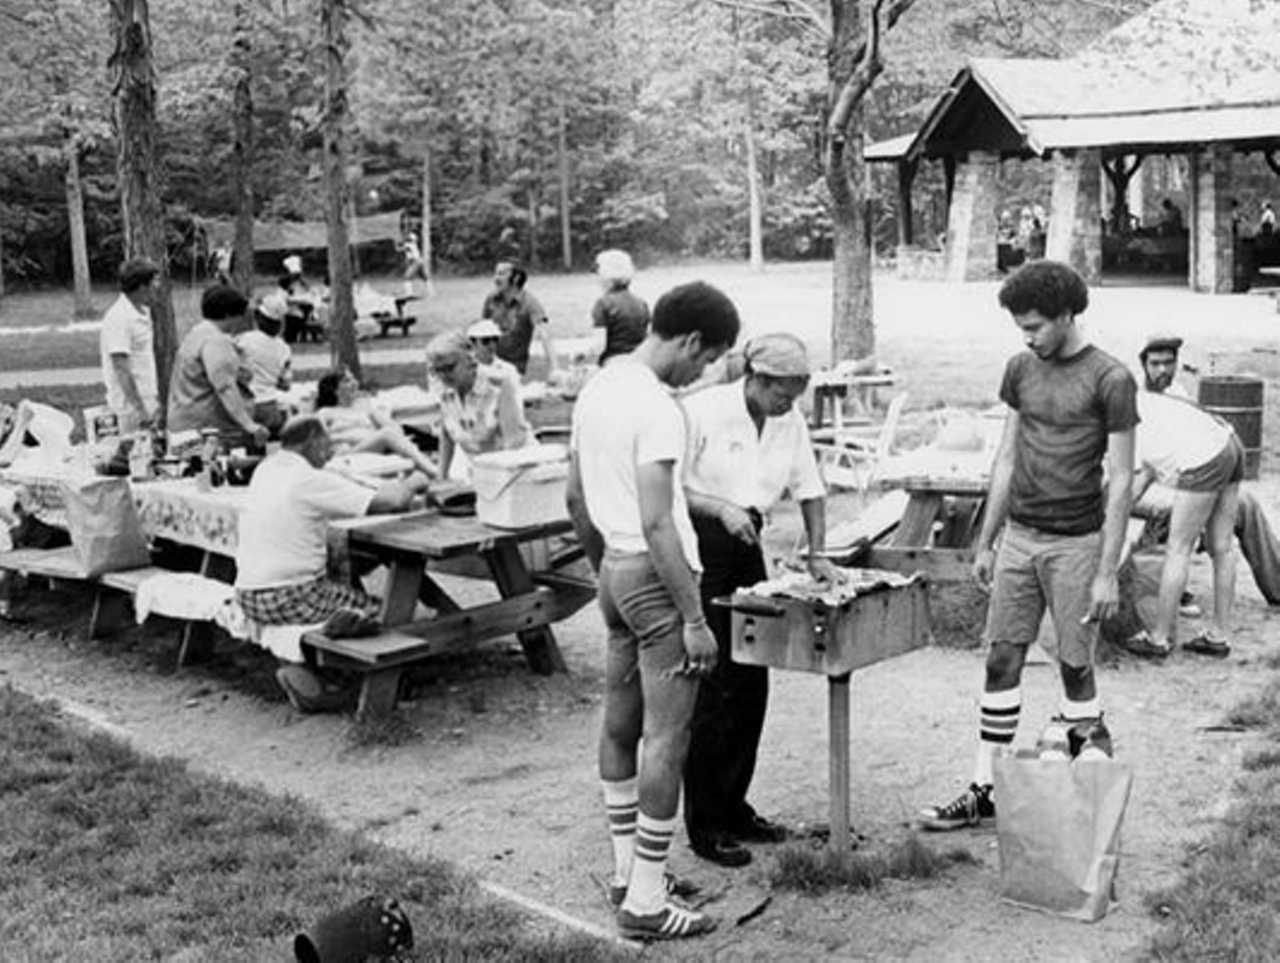 Grilling and Chilling at North Chagrin Reservation, 1973